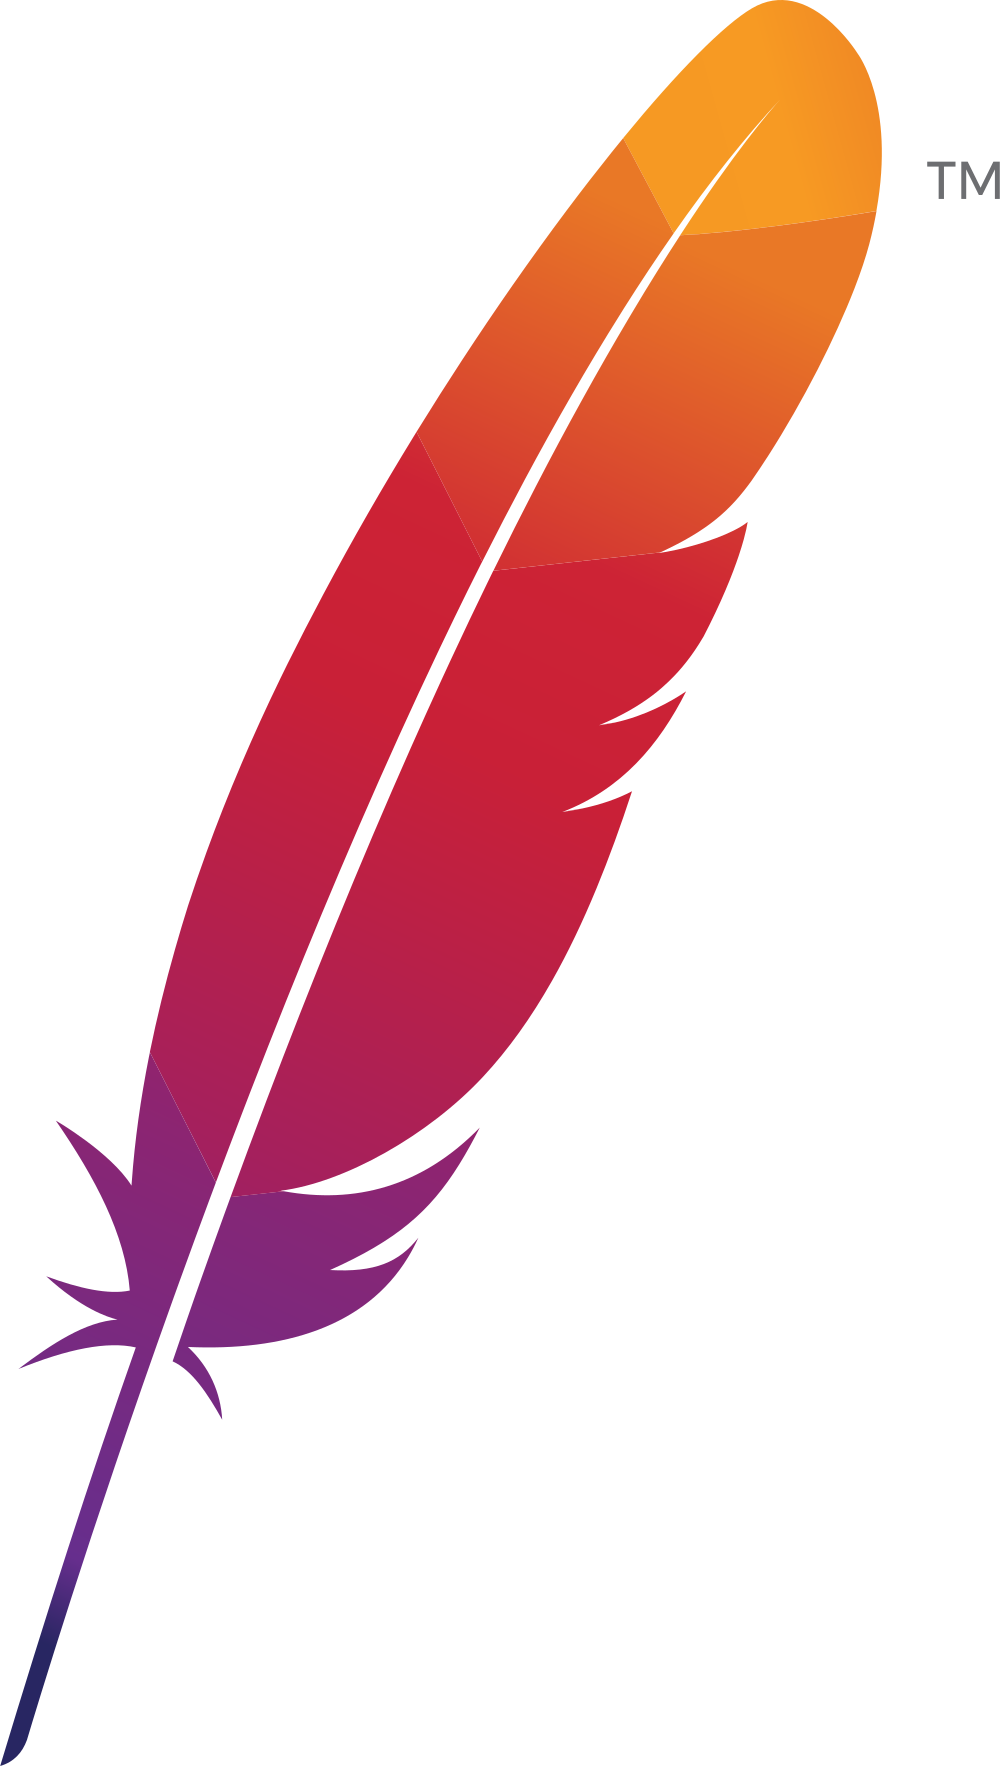 How to apply the Apache 2.0 License to your Open Source software project